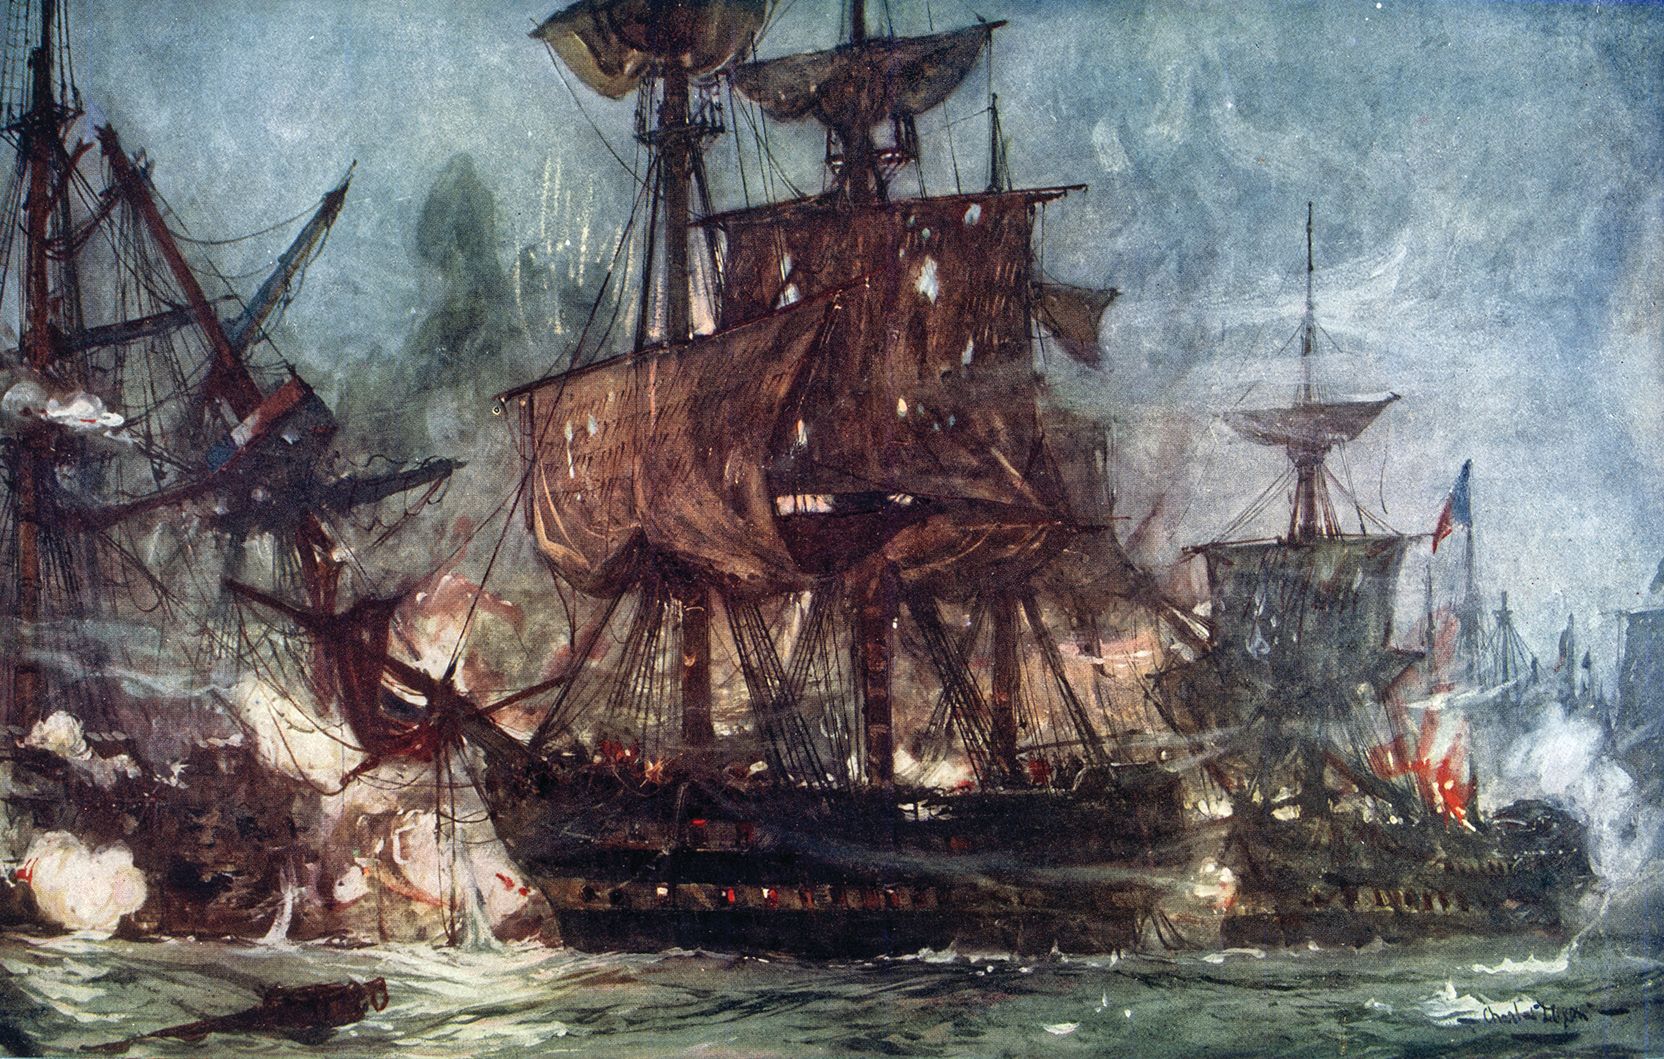 This painting by Charles Edward Dixon shows the HMS Majestic, which became entangled in the canvas and rigging of several French ships and suffered 150 casualities, but continued to pour cannon fire into the enemy.